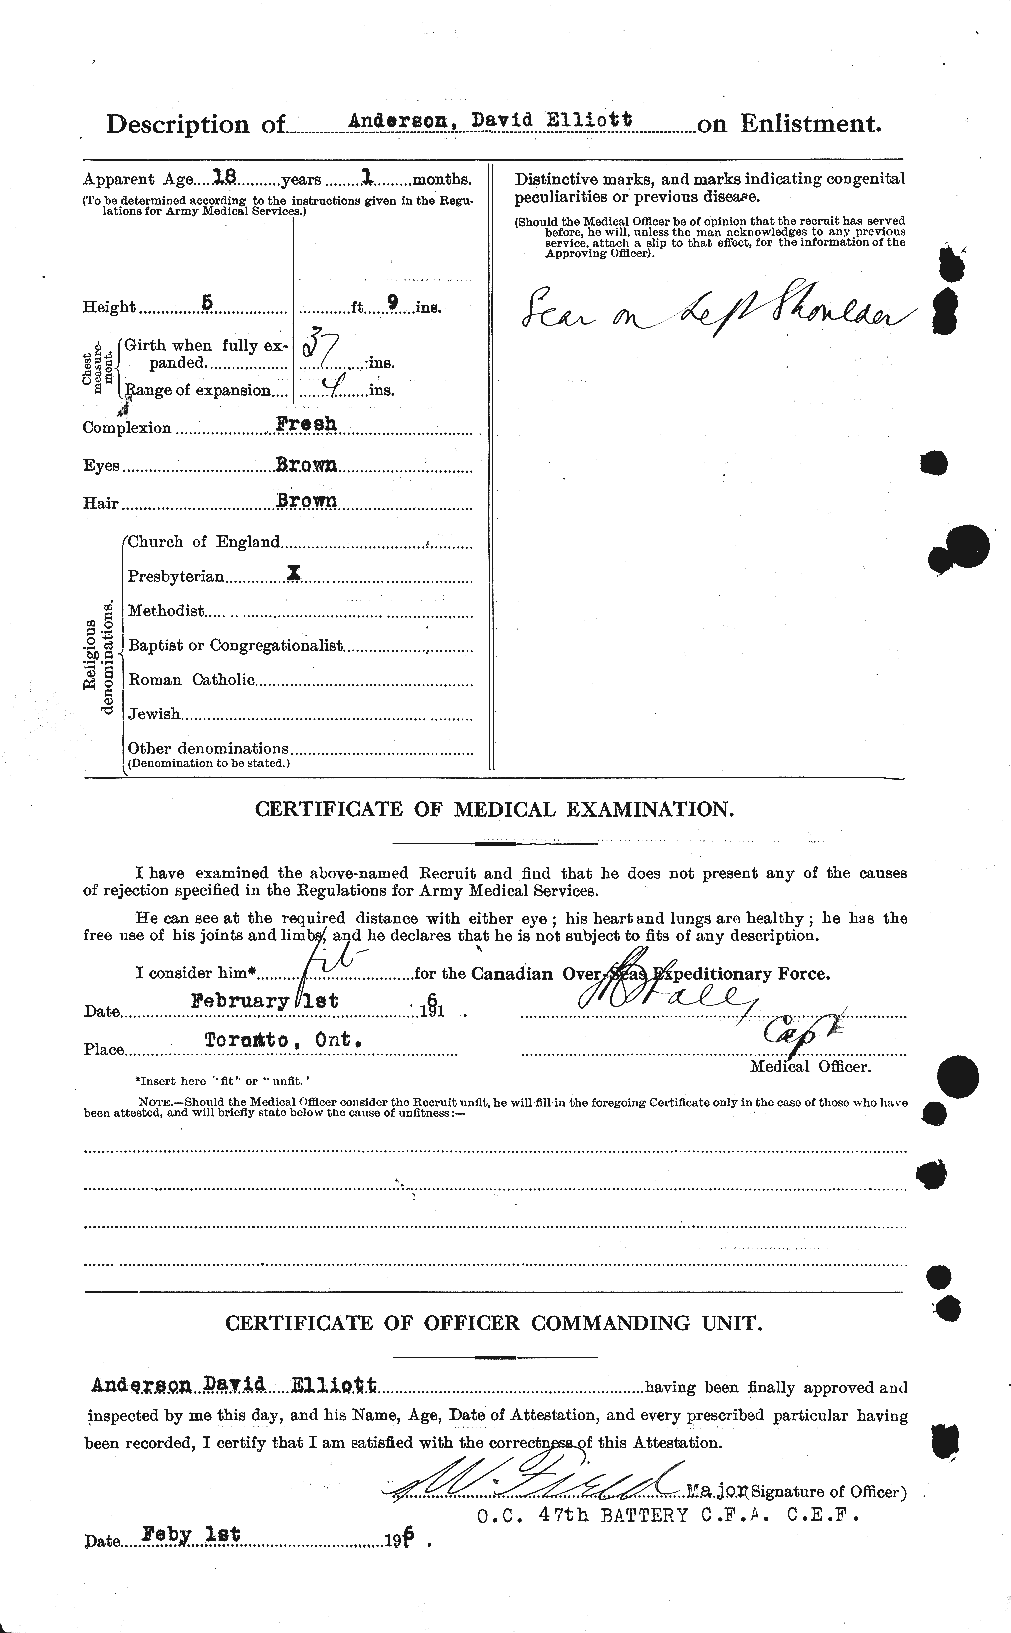 Personnel Records of the First World War - CEF 210013b